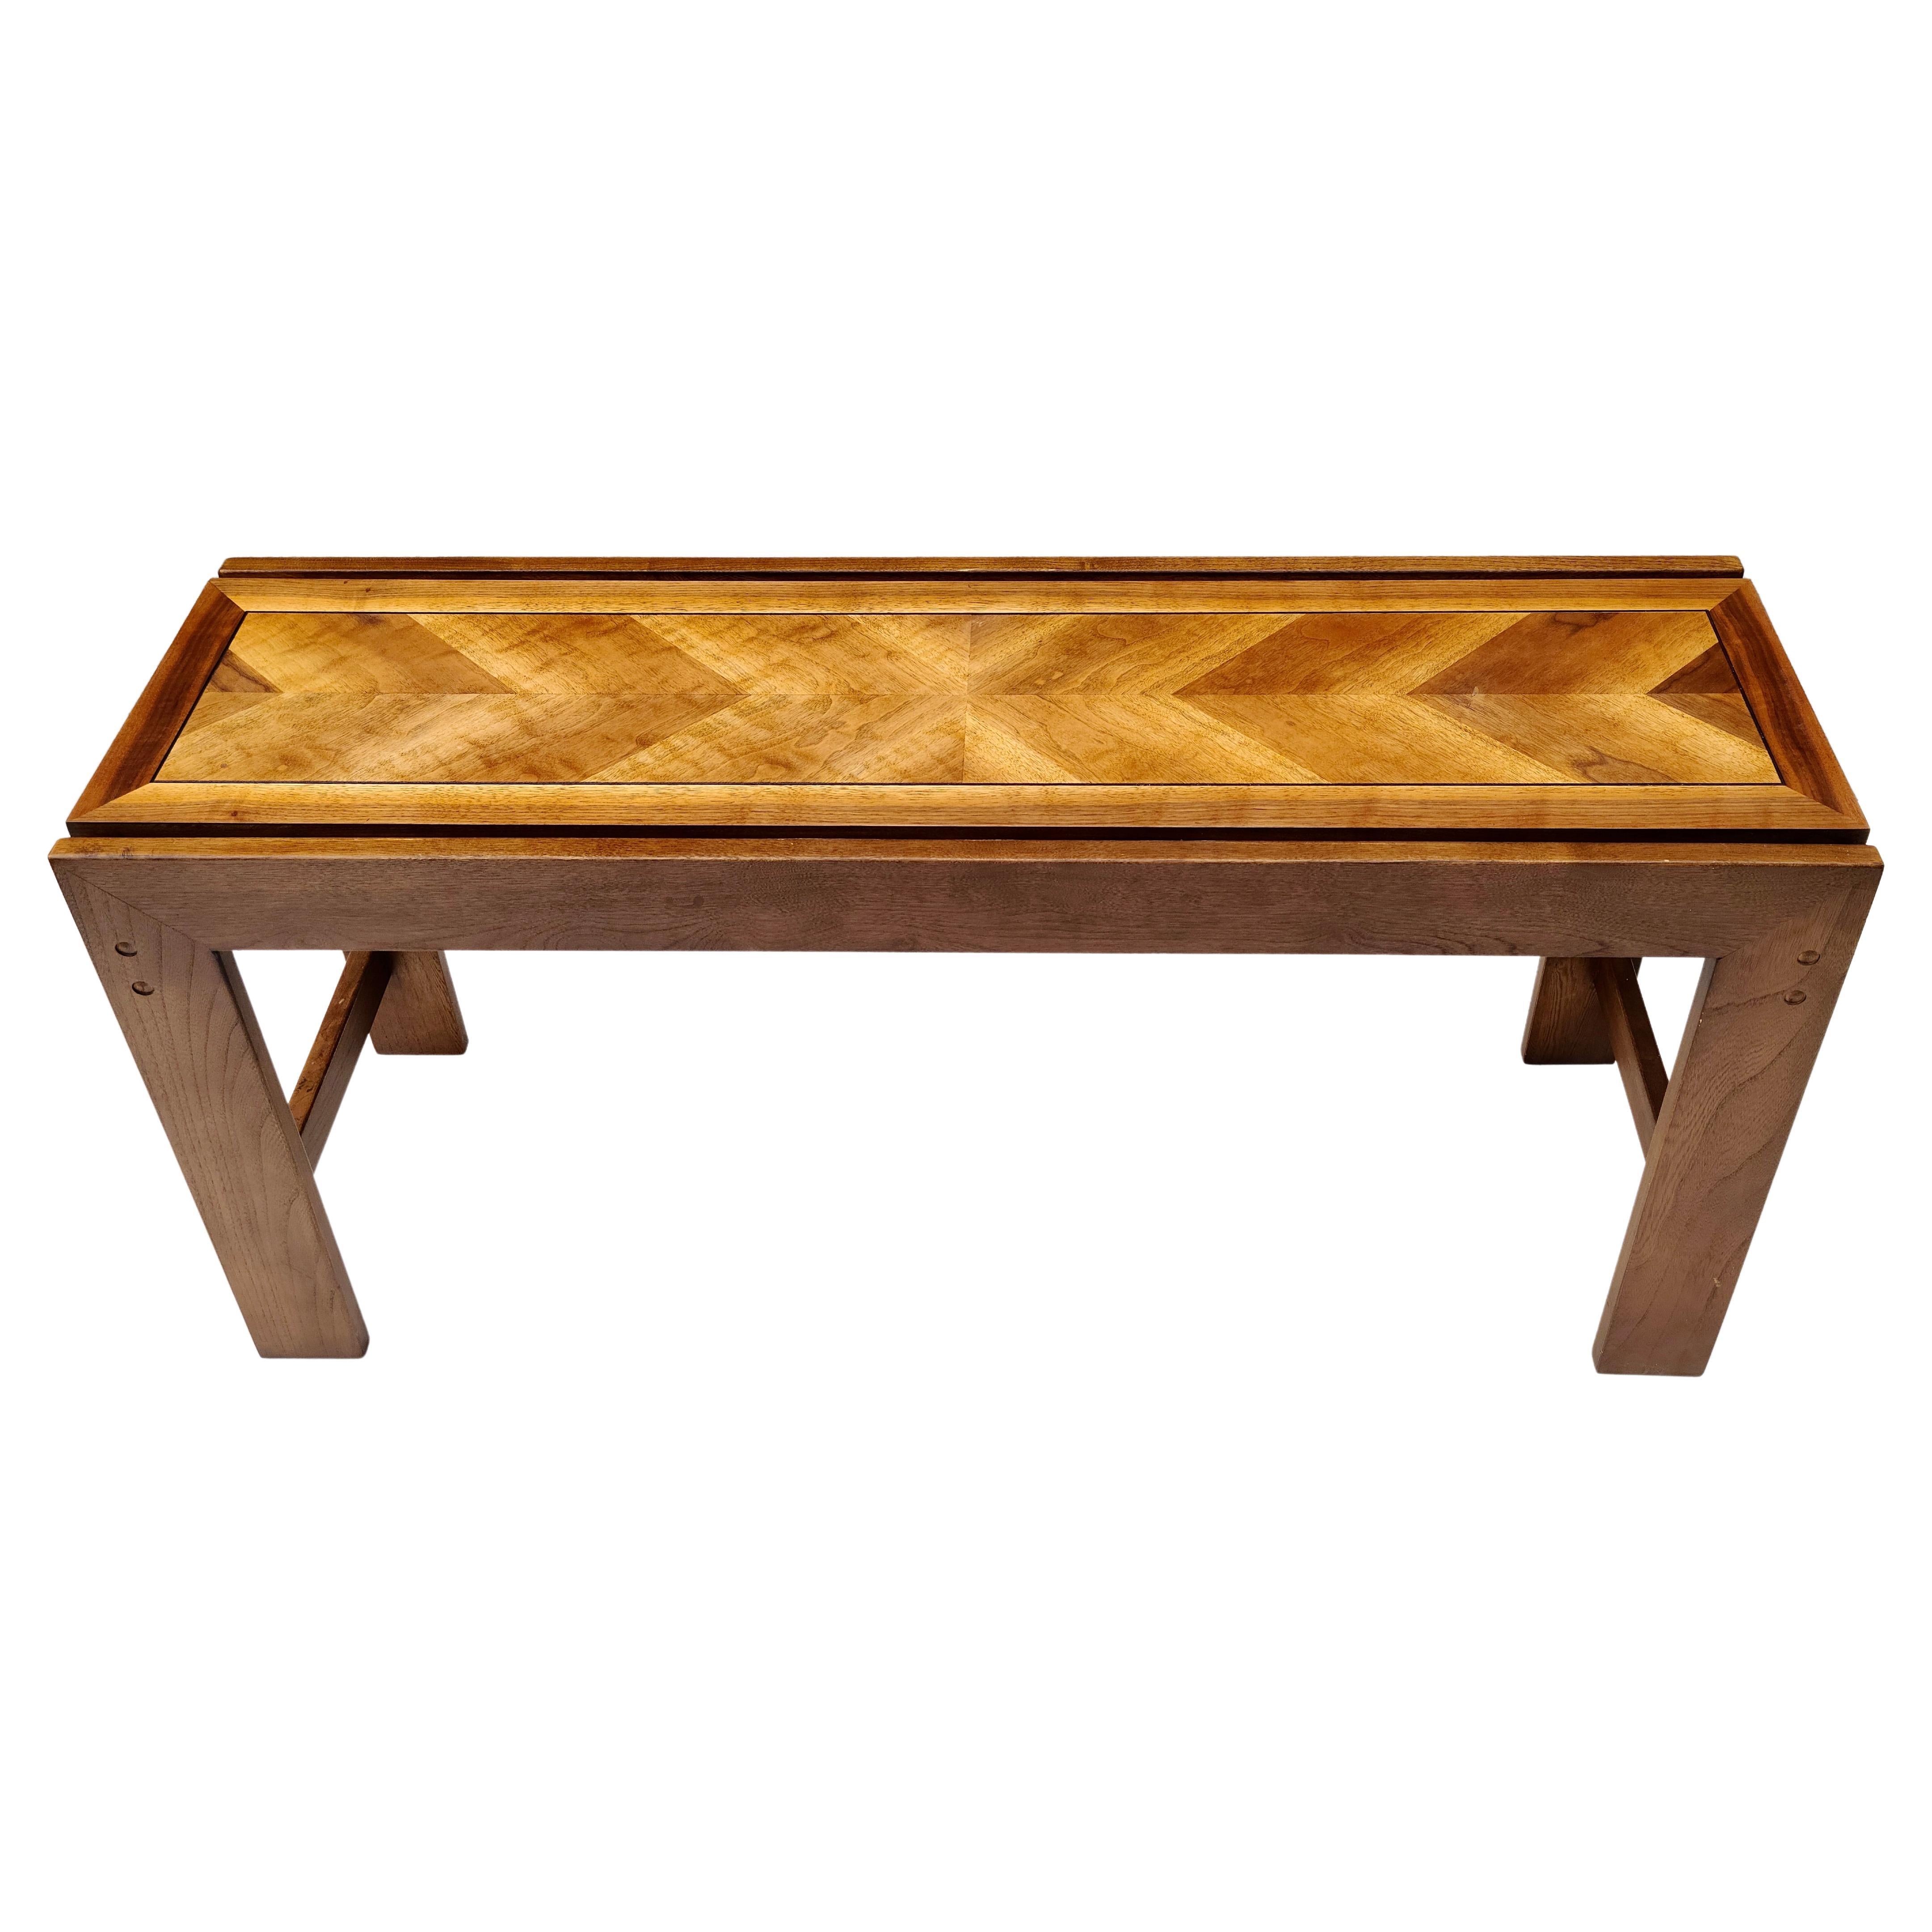 Please feel free to reach out for accurate shipping to your location.

Console Table By Lane.

Veneer is 4 way book matched. 
Looks lighter in one direction because of the propellor illusion.
Curly walnut pattern provides maybe another level of